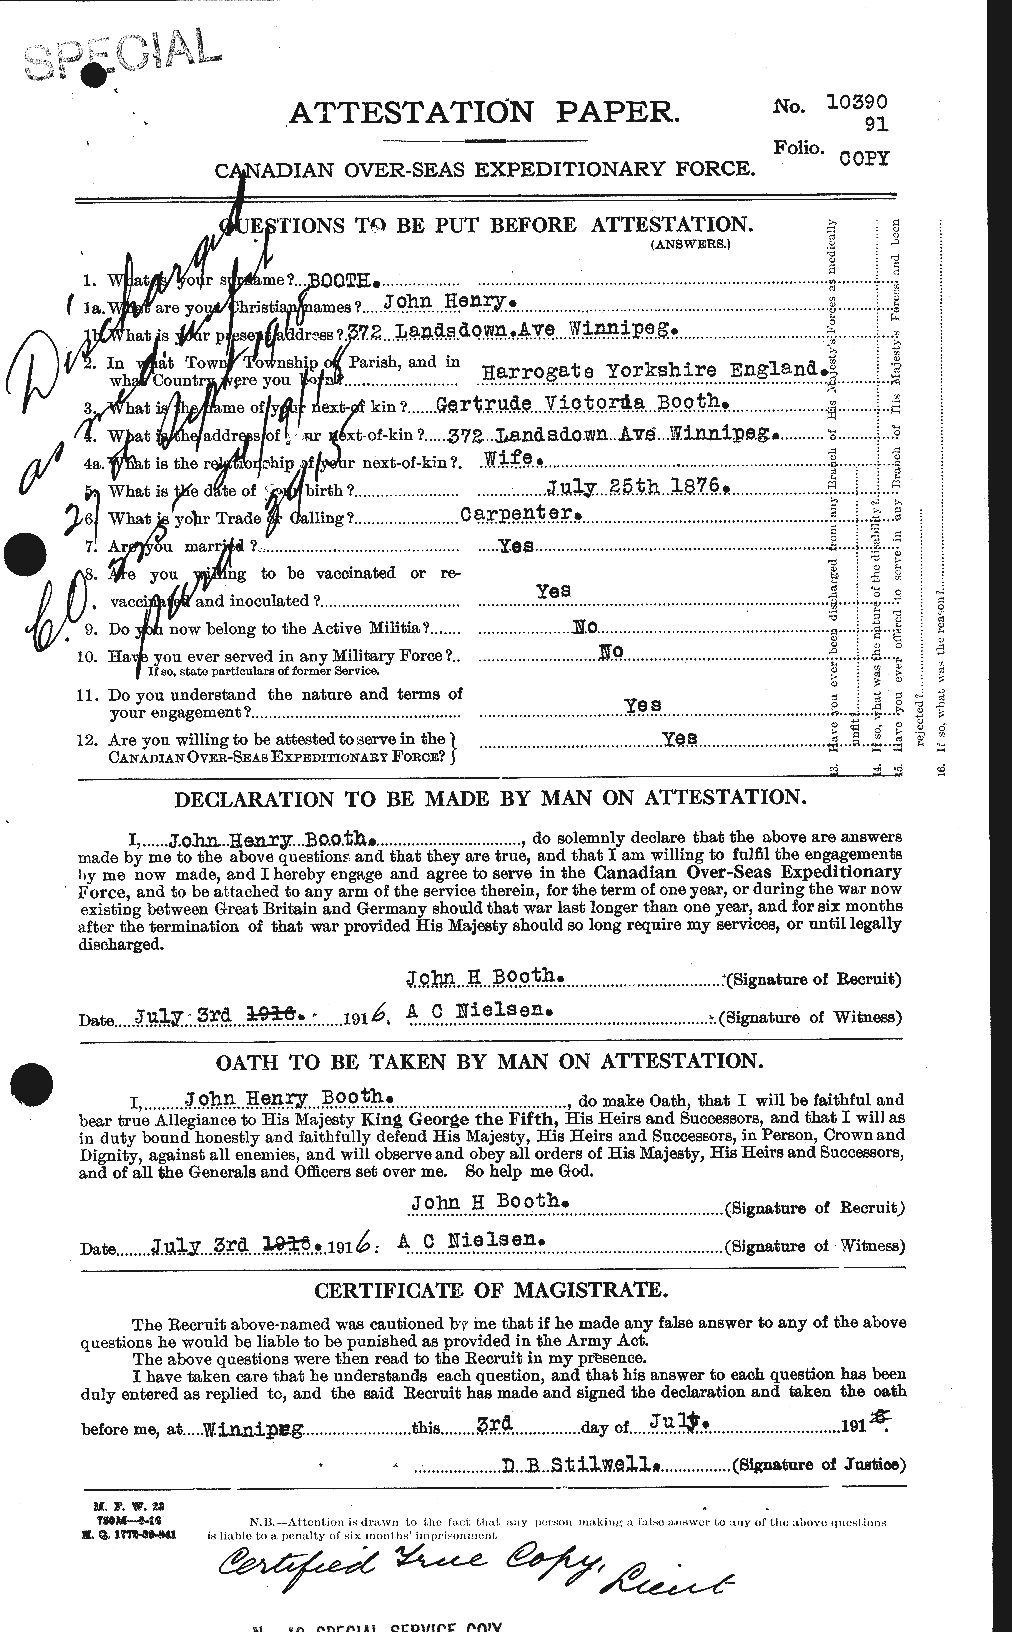 Personnel Records of the First World War - CEF 250928a